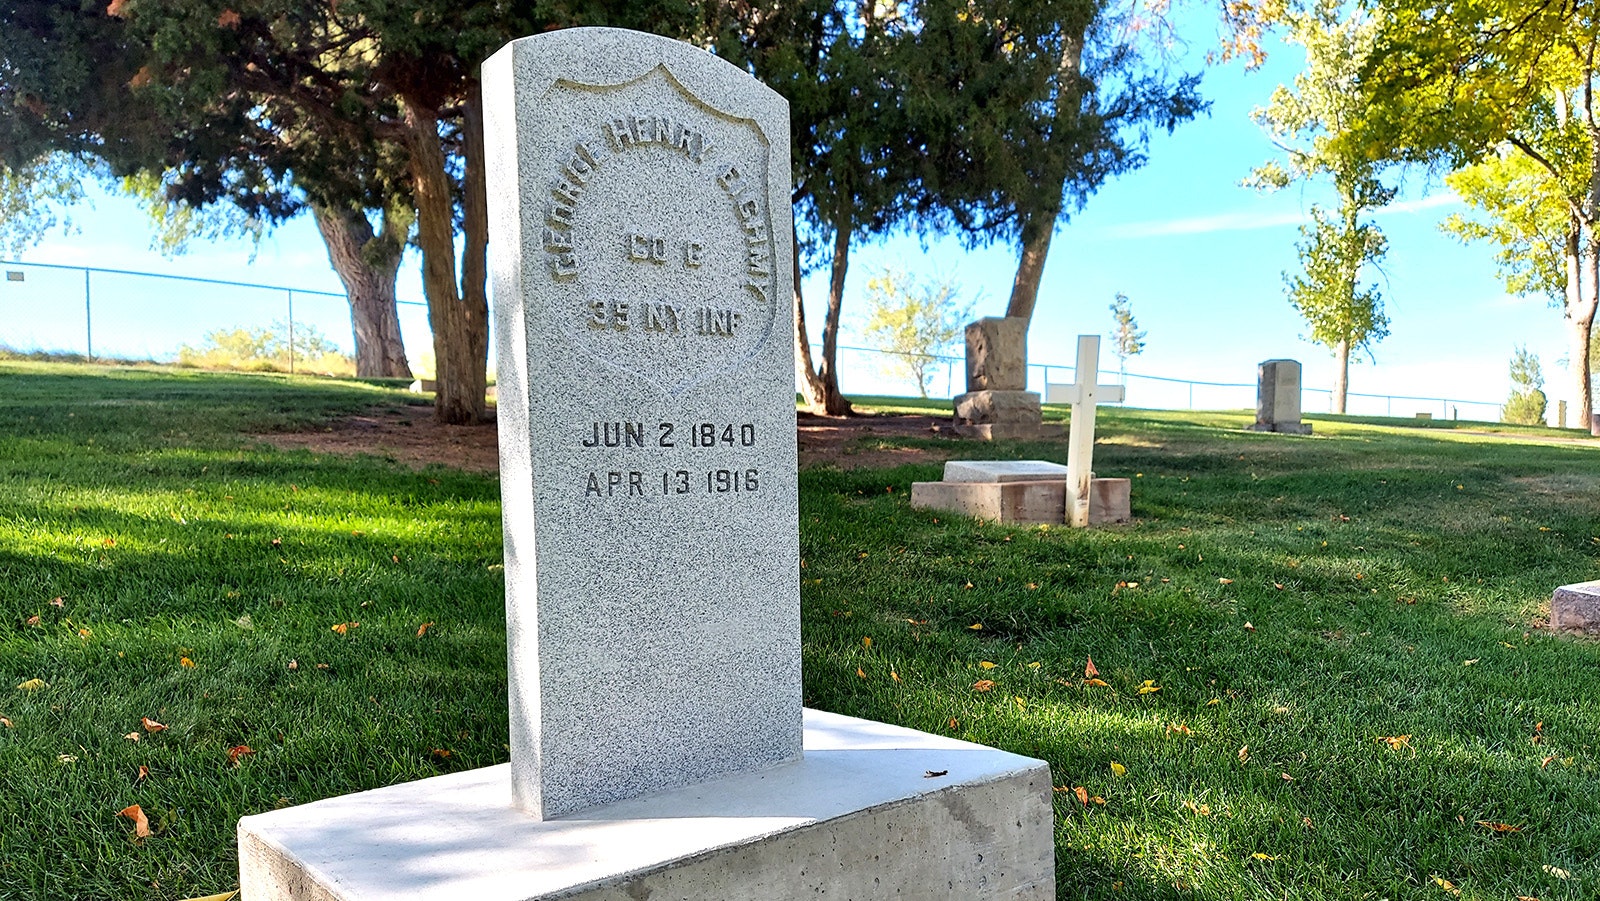 A new headstone corrects a 107-year-old mistake that George Henry Eighmy was a Union soldier in the Civil War and didn't fight for the Confederacy.